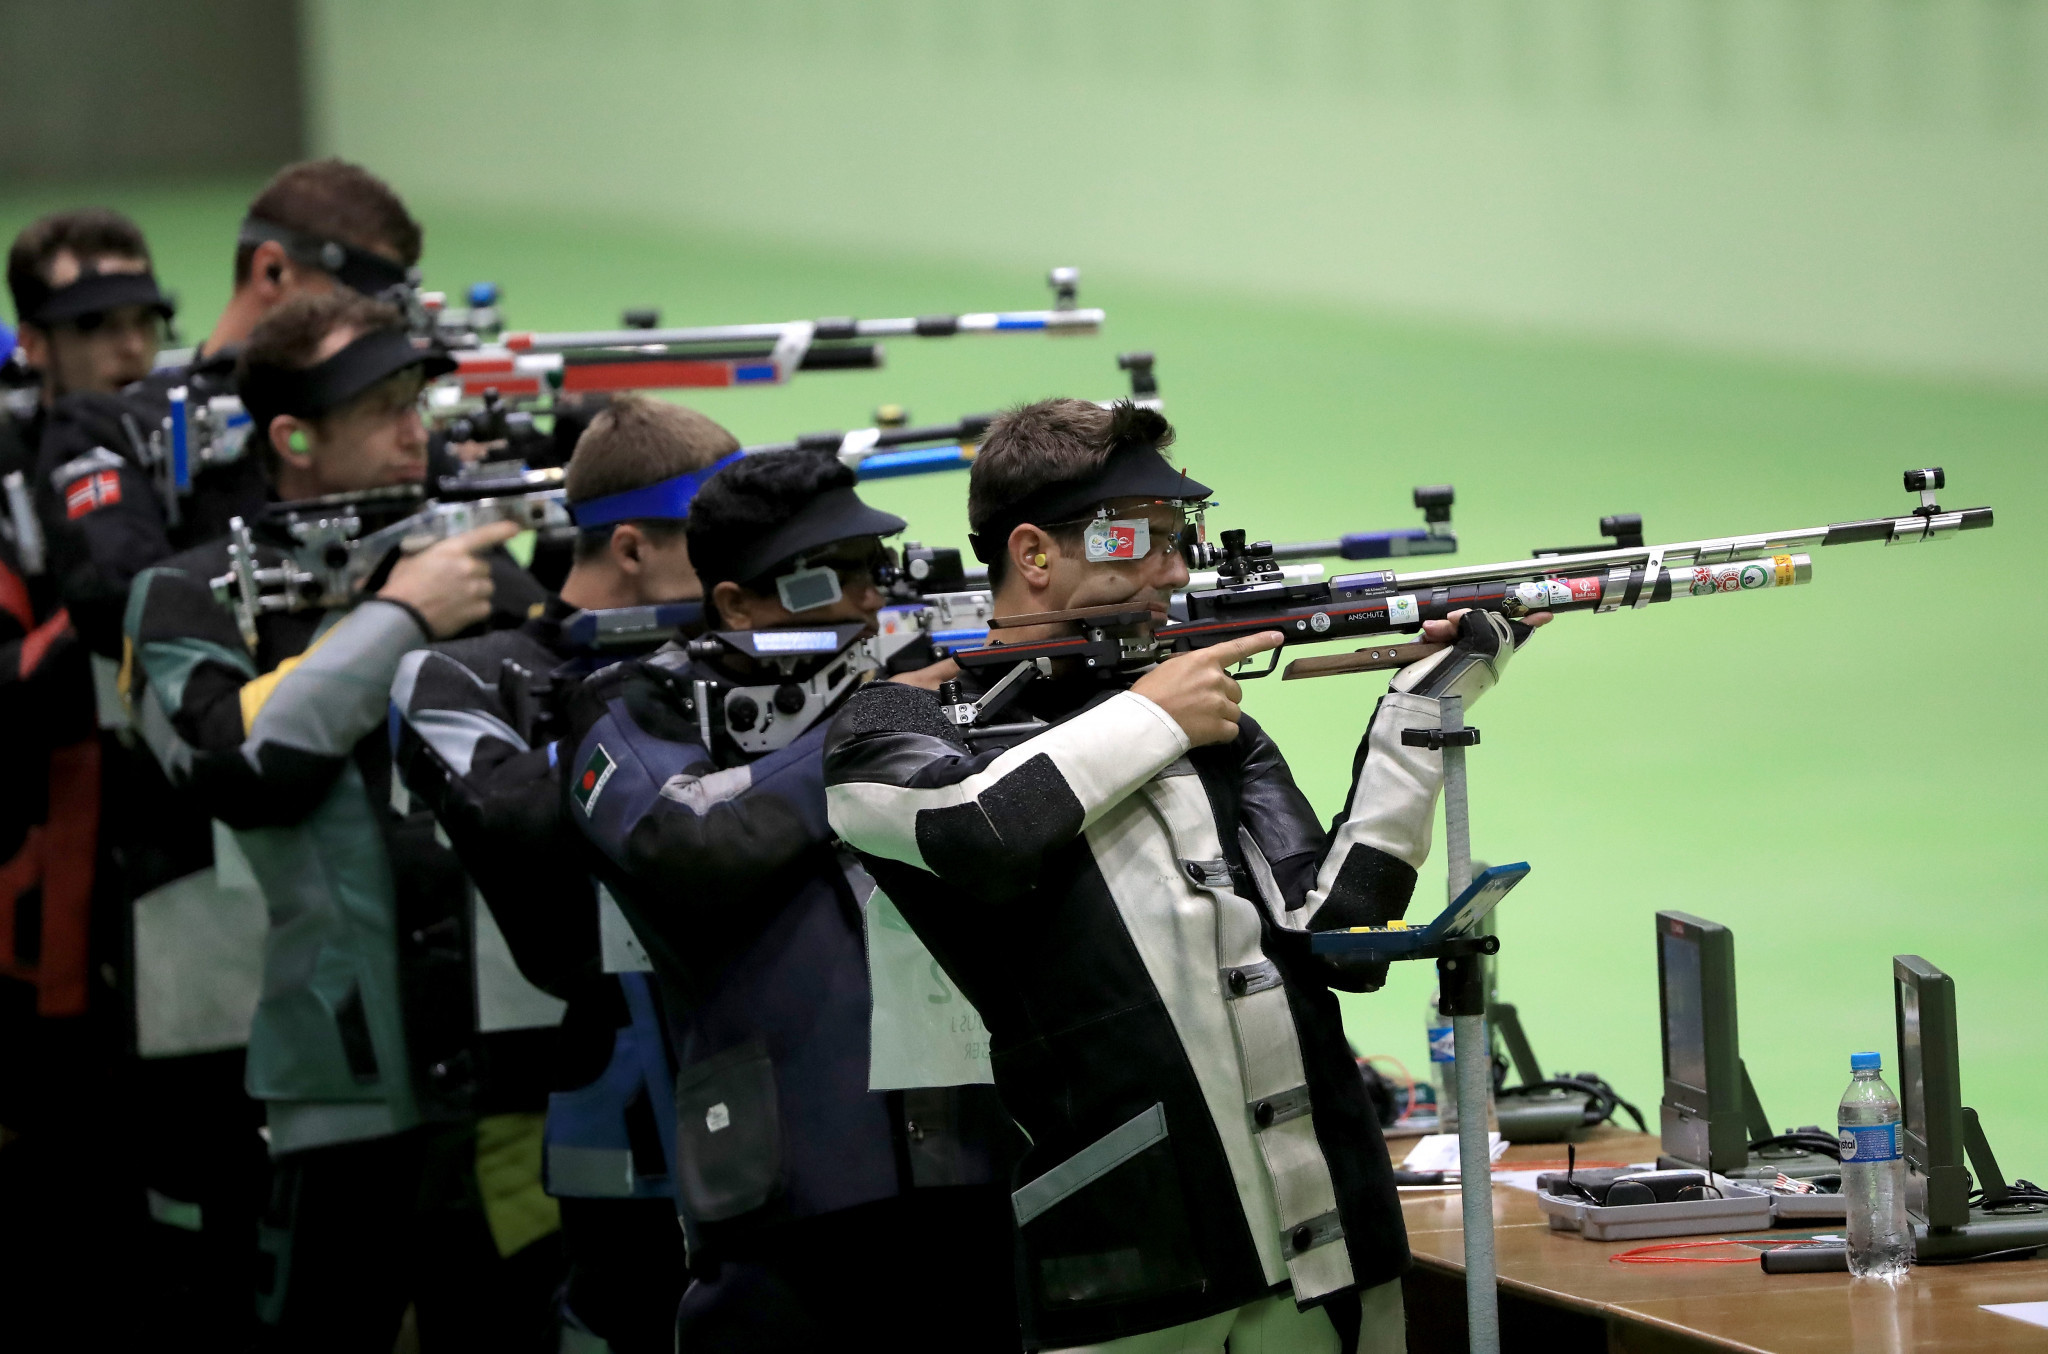 Babuta and Brázdová bag first gold medals of ISSF World Cup in Changwon